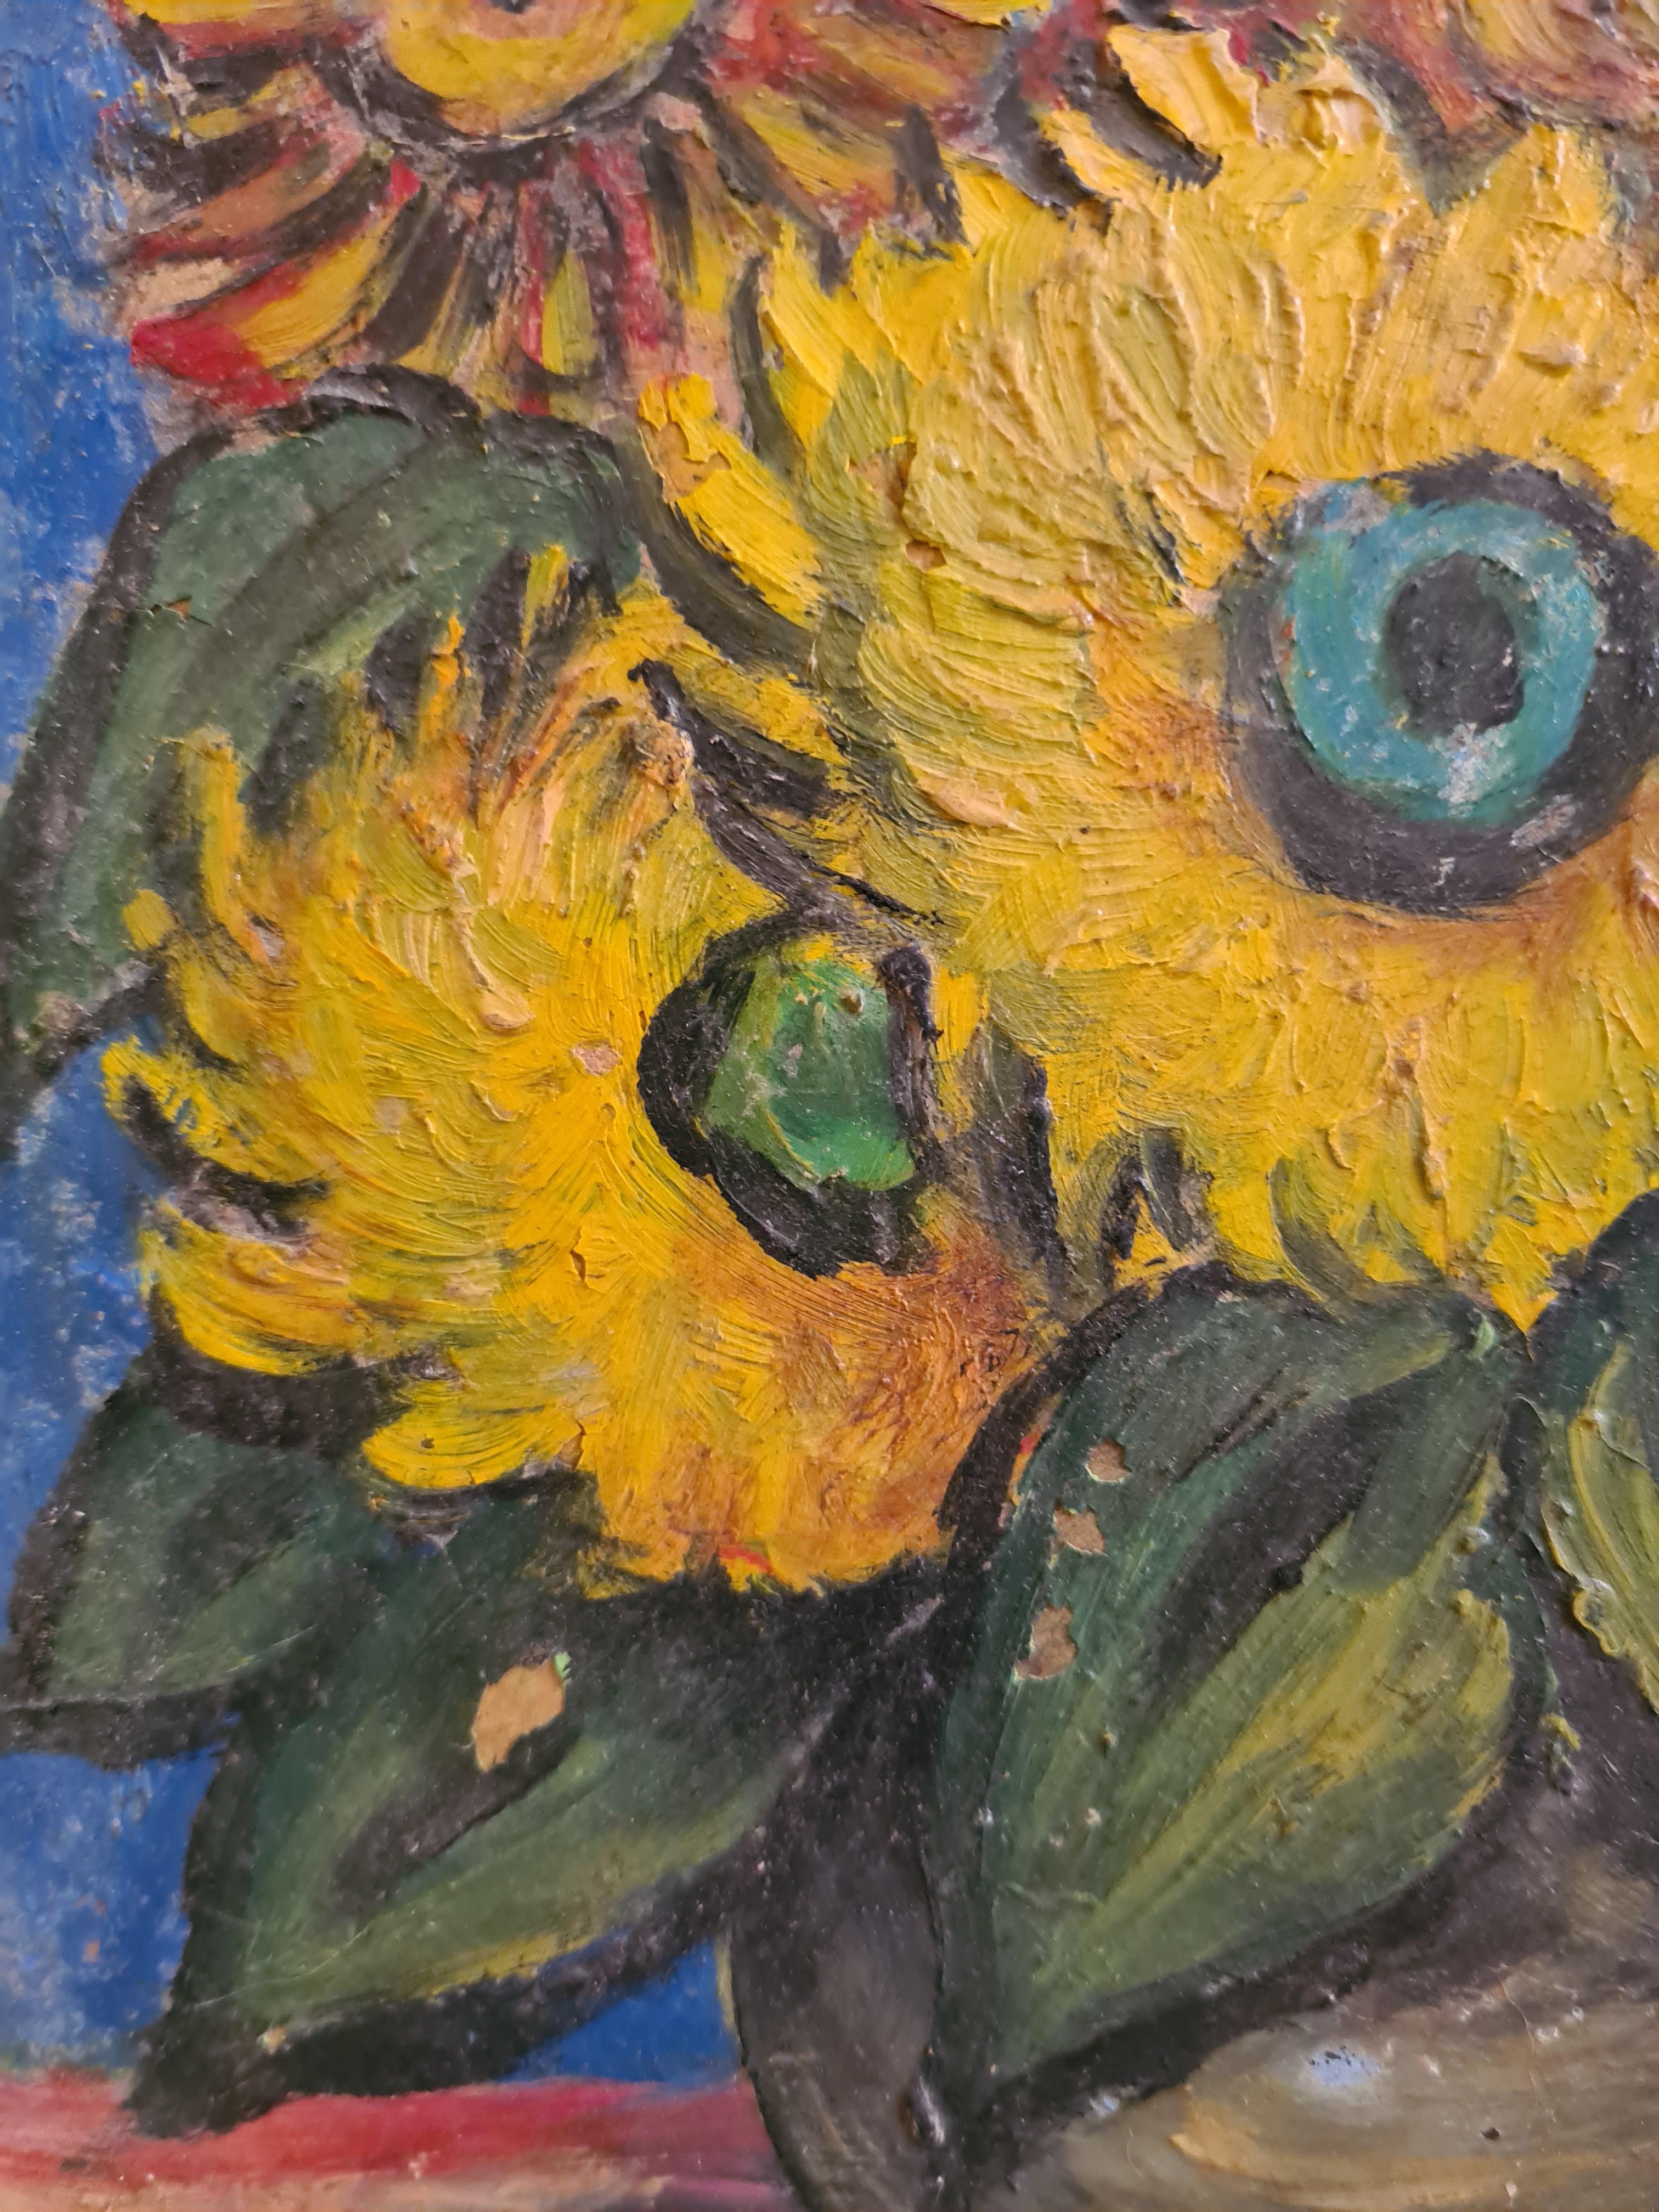 Sunflowers. 'Bateau-Lavoir' Movement Oil on Board, Hommage to Van Gogh. 1